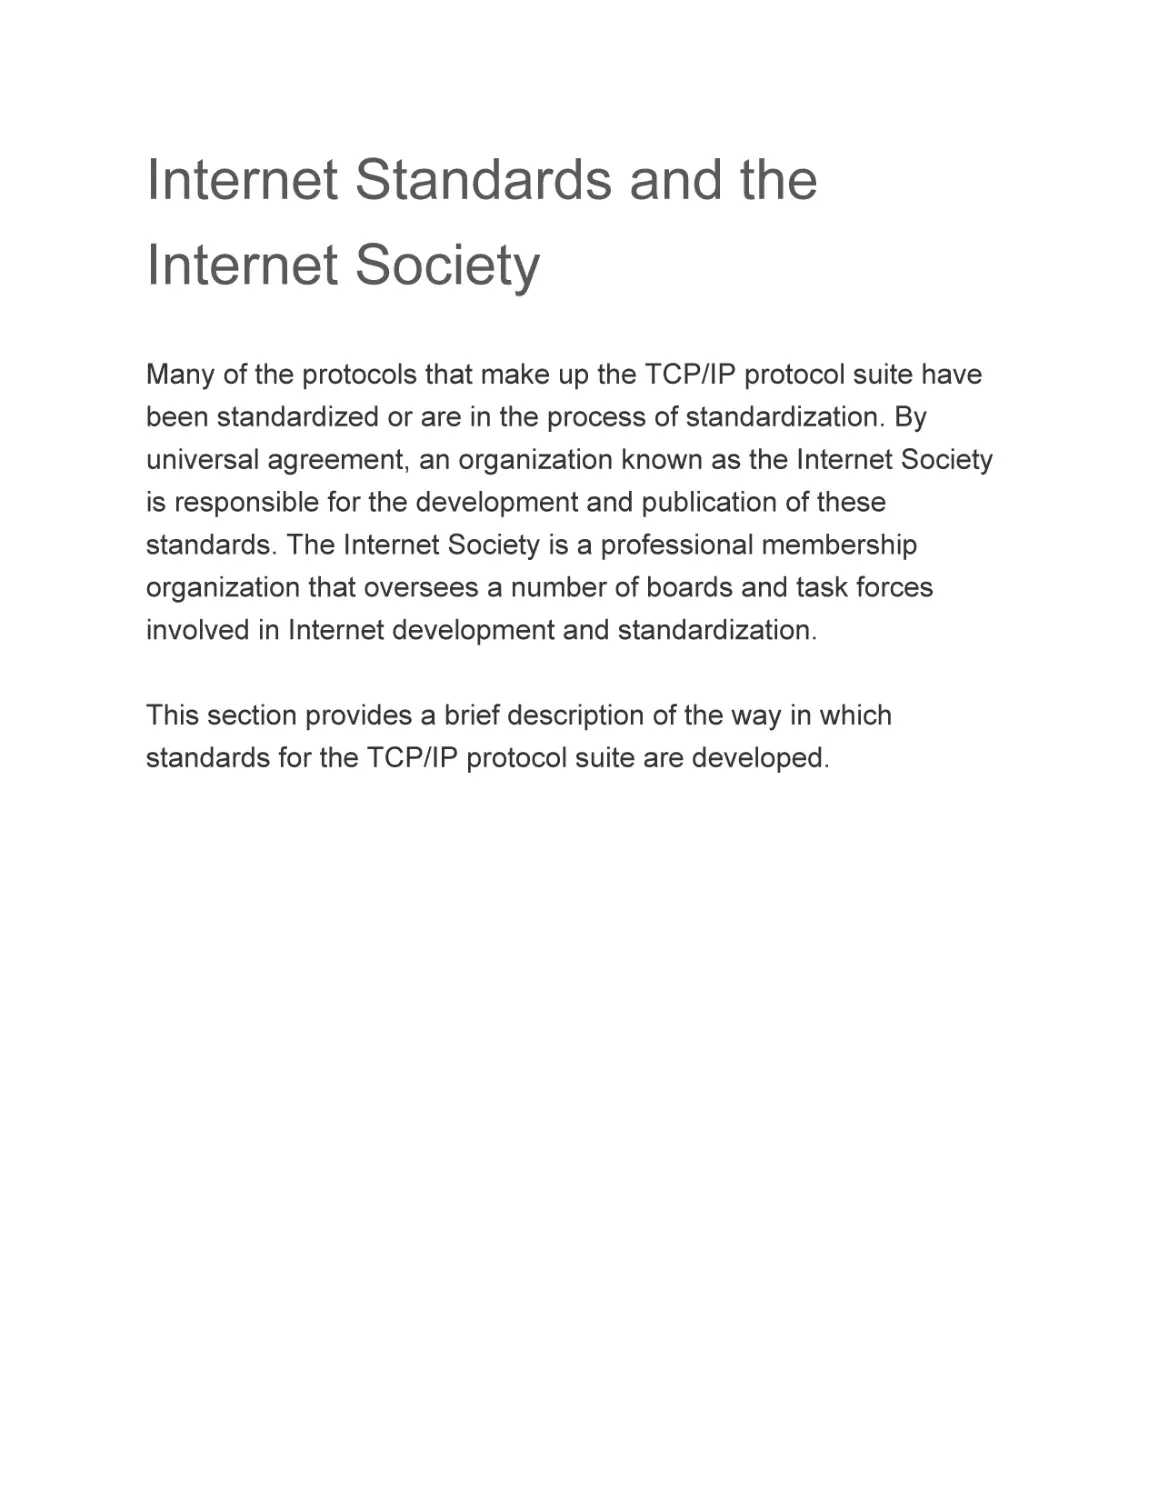 Internet Standards and the Internet Society